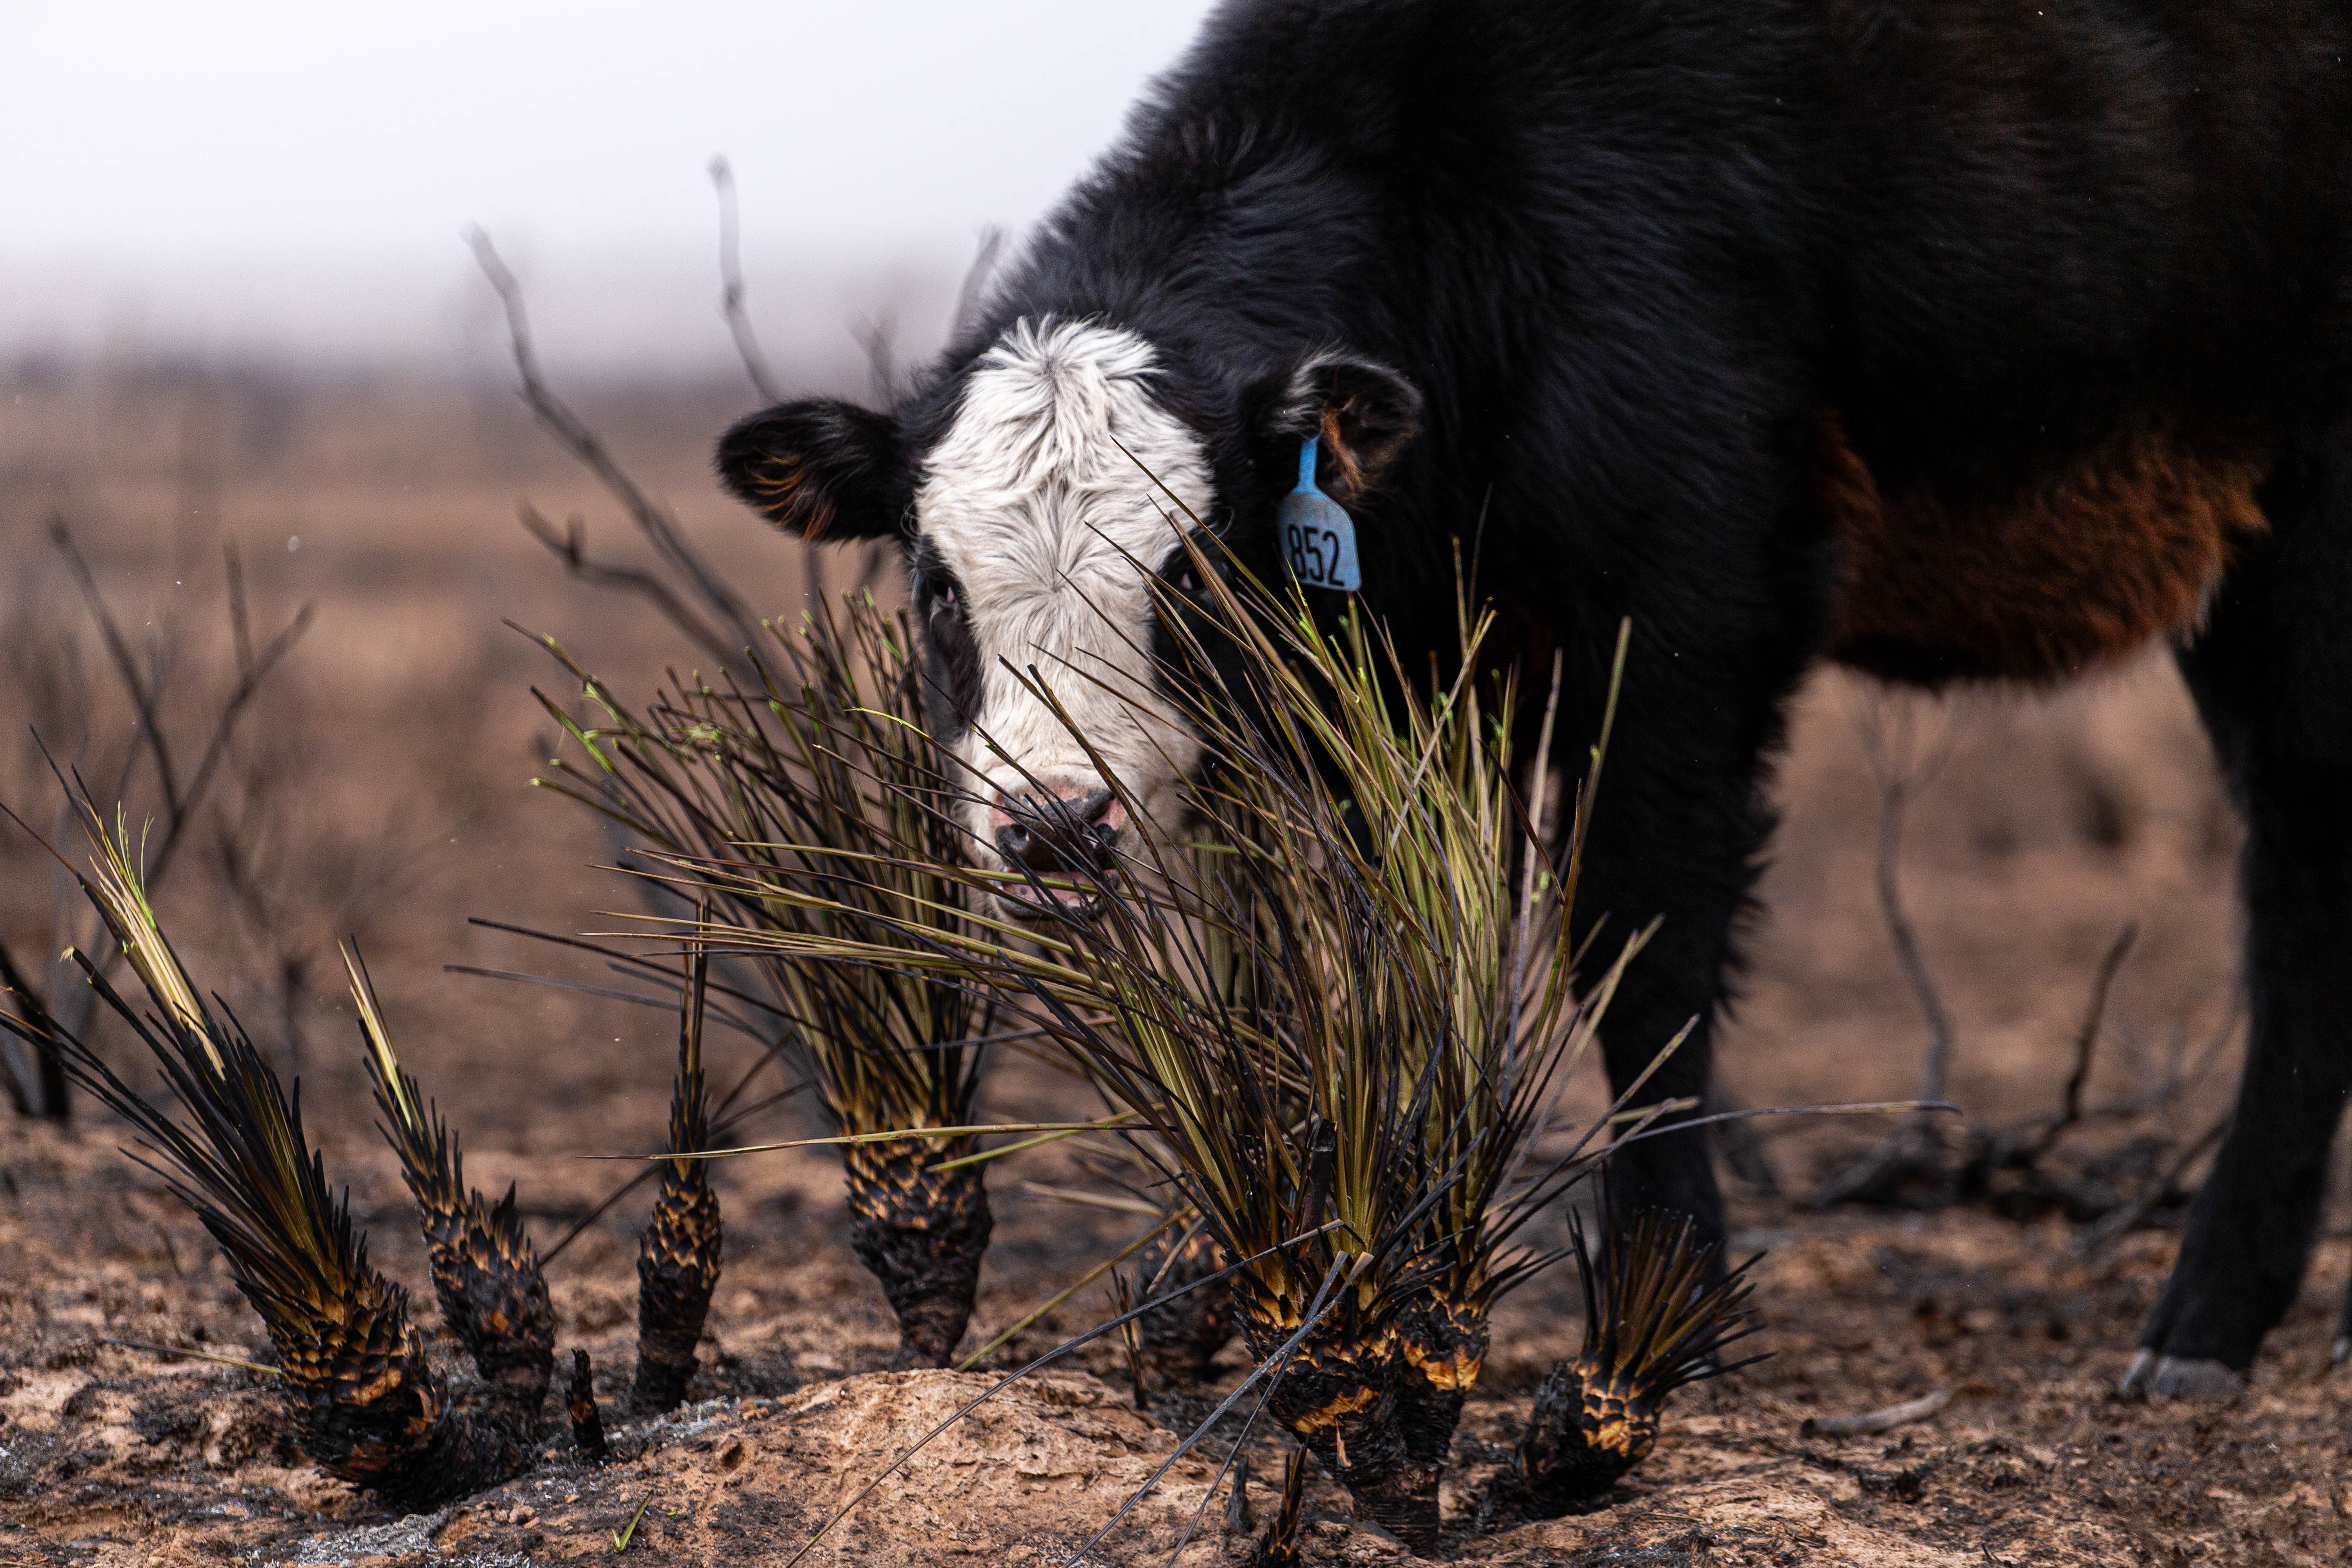 Calf foraging in pasture after devastating wildfires